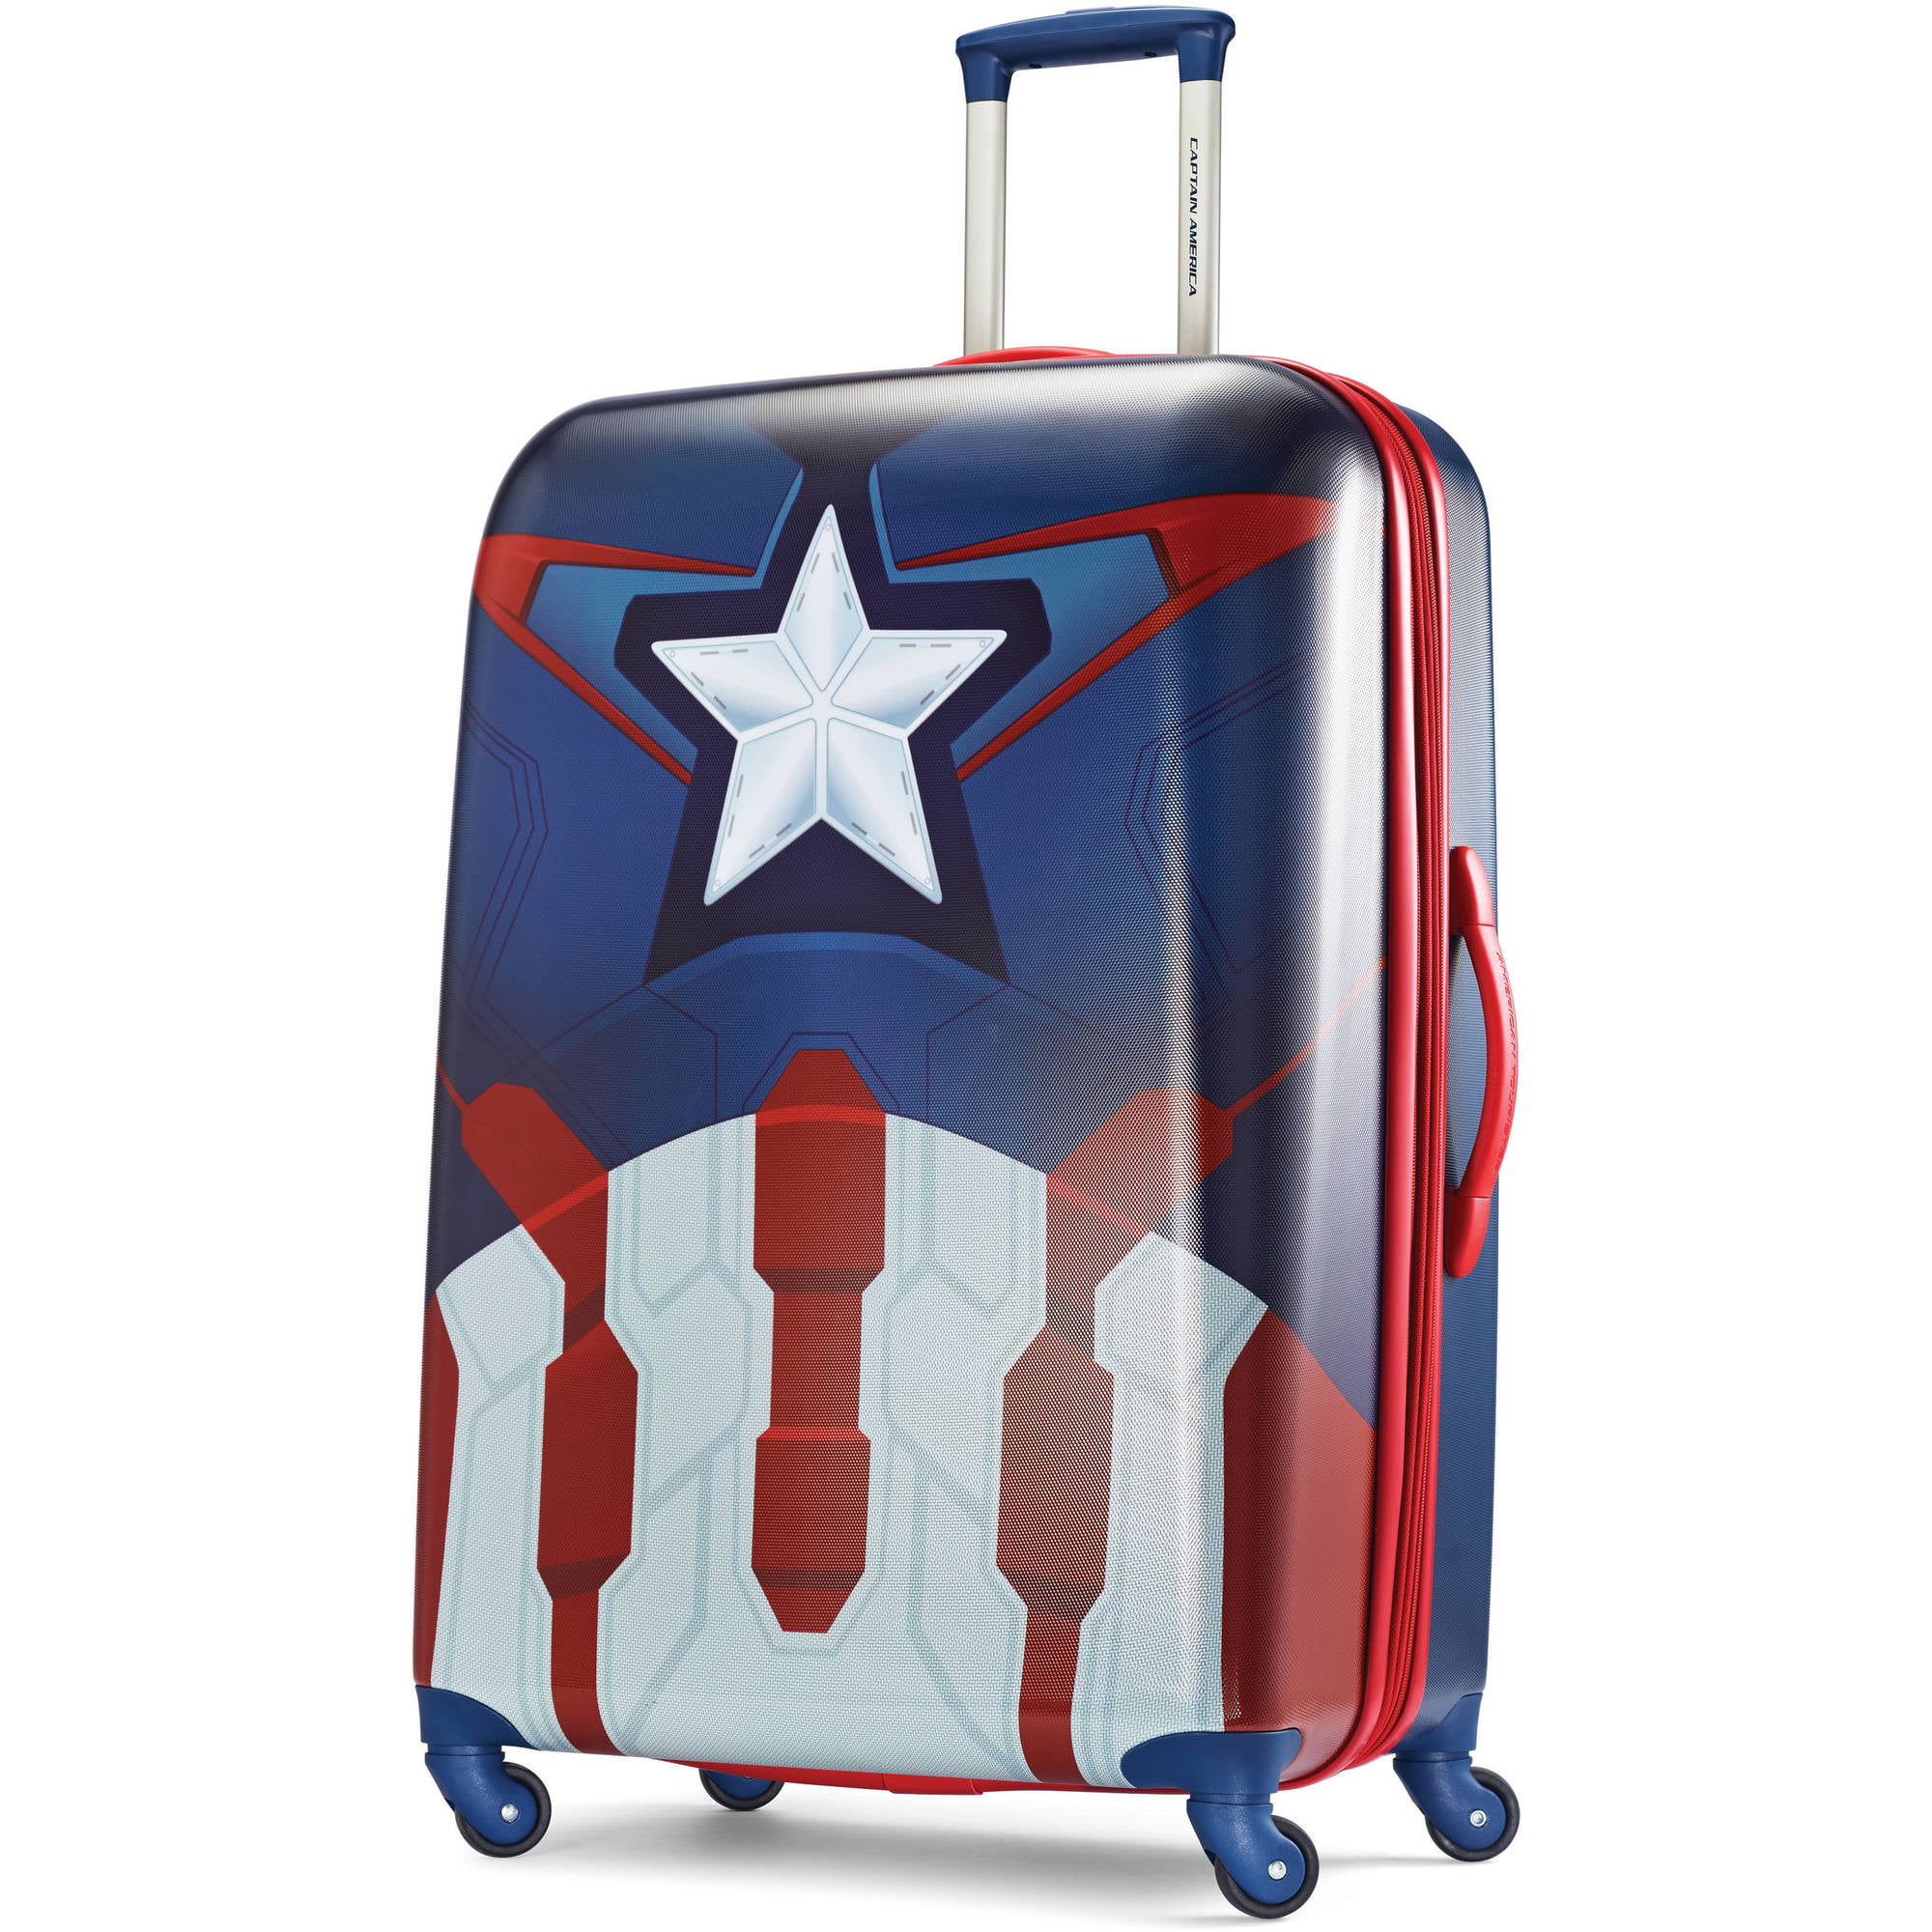 American Tourister Marvel Comics Hardside Luggage with Spinner Wheels Green/Red/Black